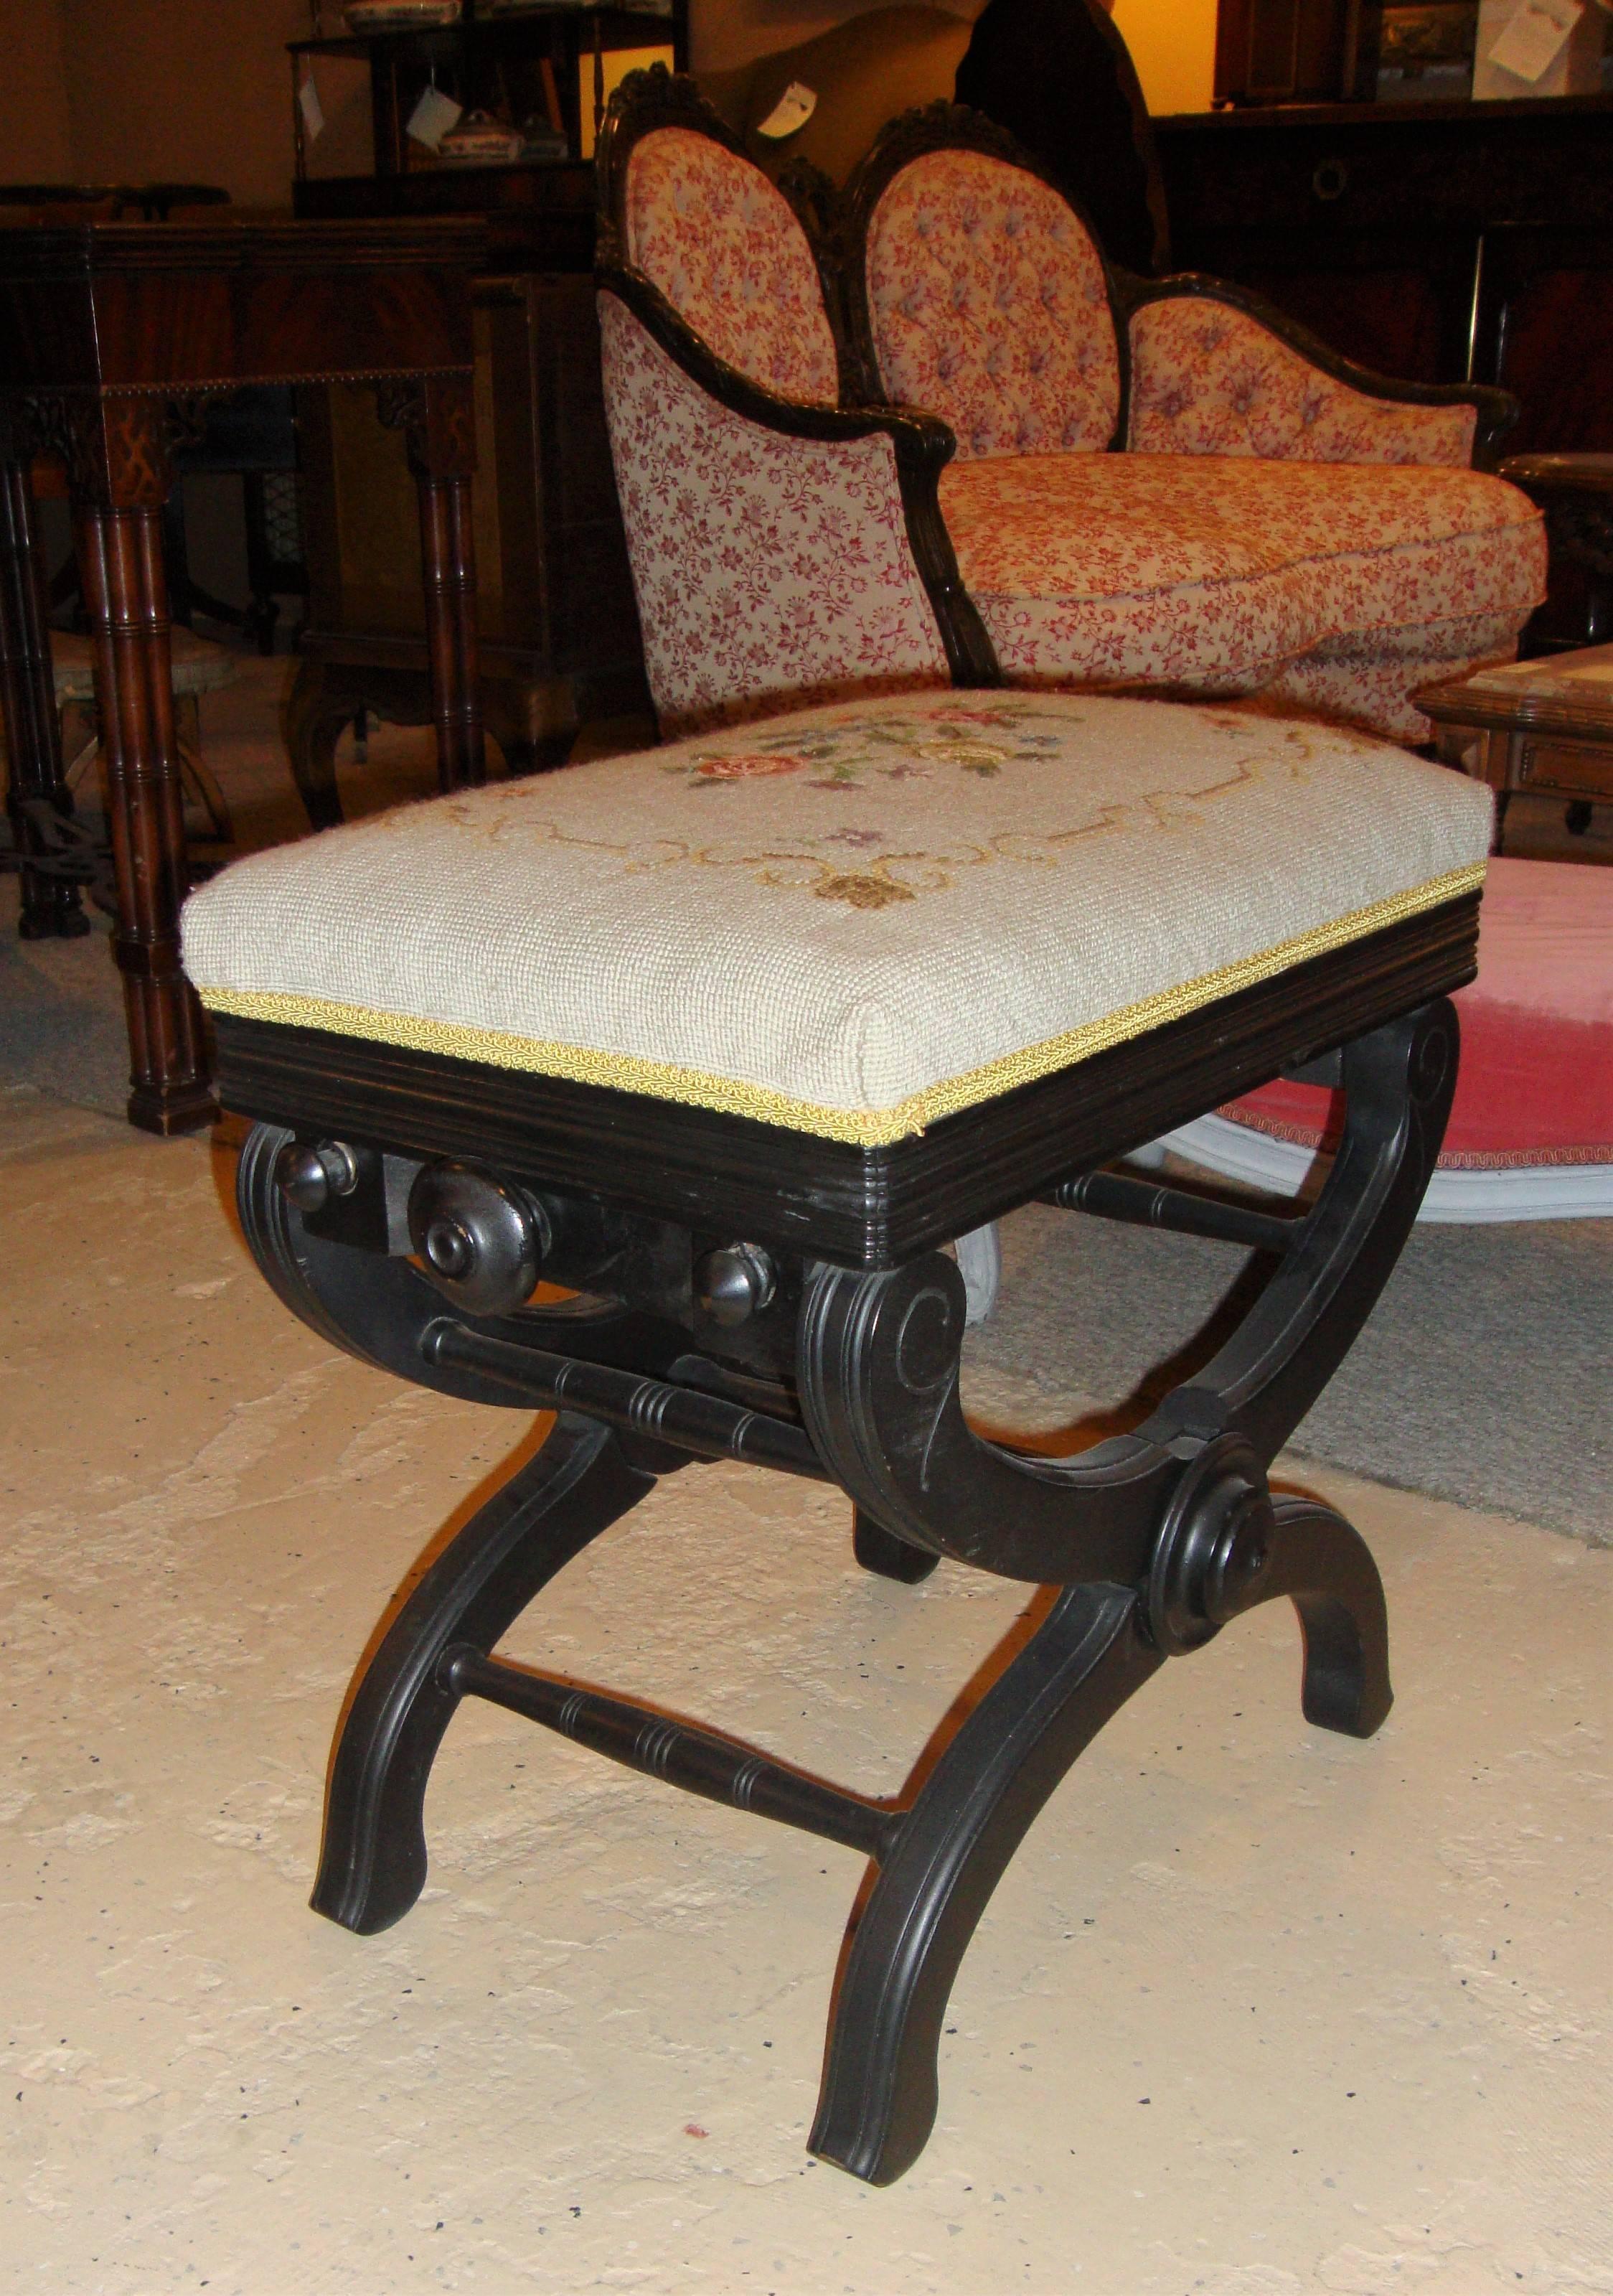 American Rare Victorian Antique Adjustable Piano Bench Ebony Finish Hand Embroidered Seat